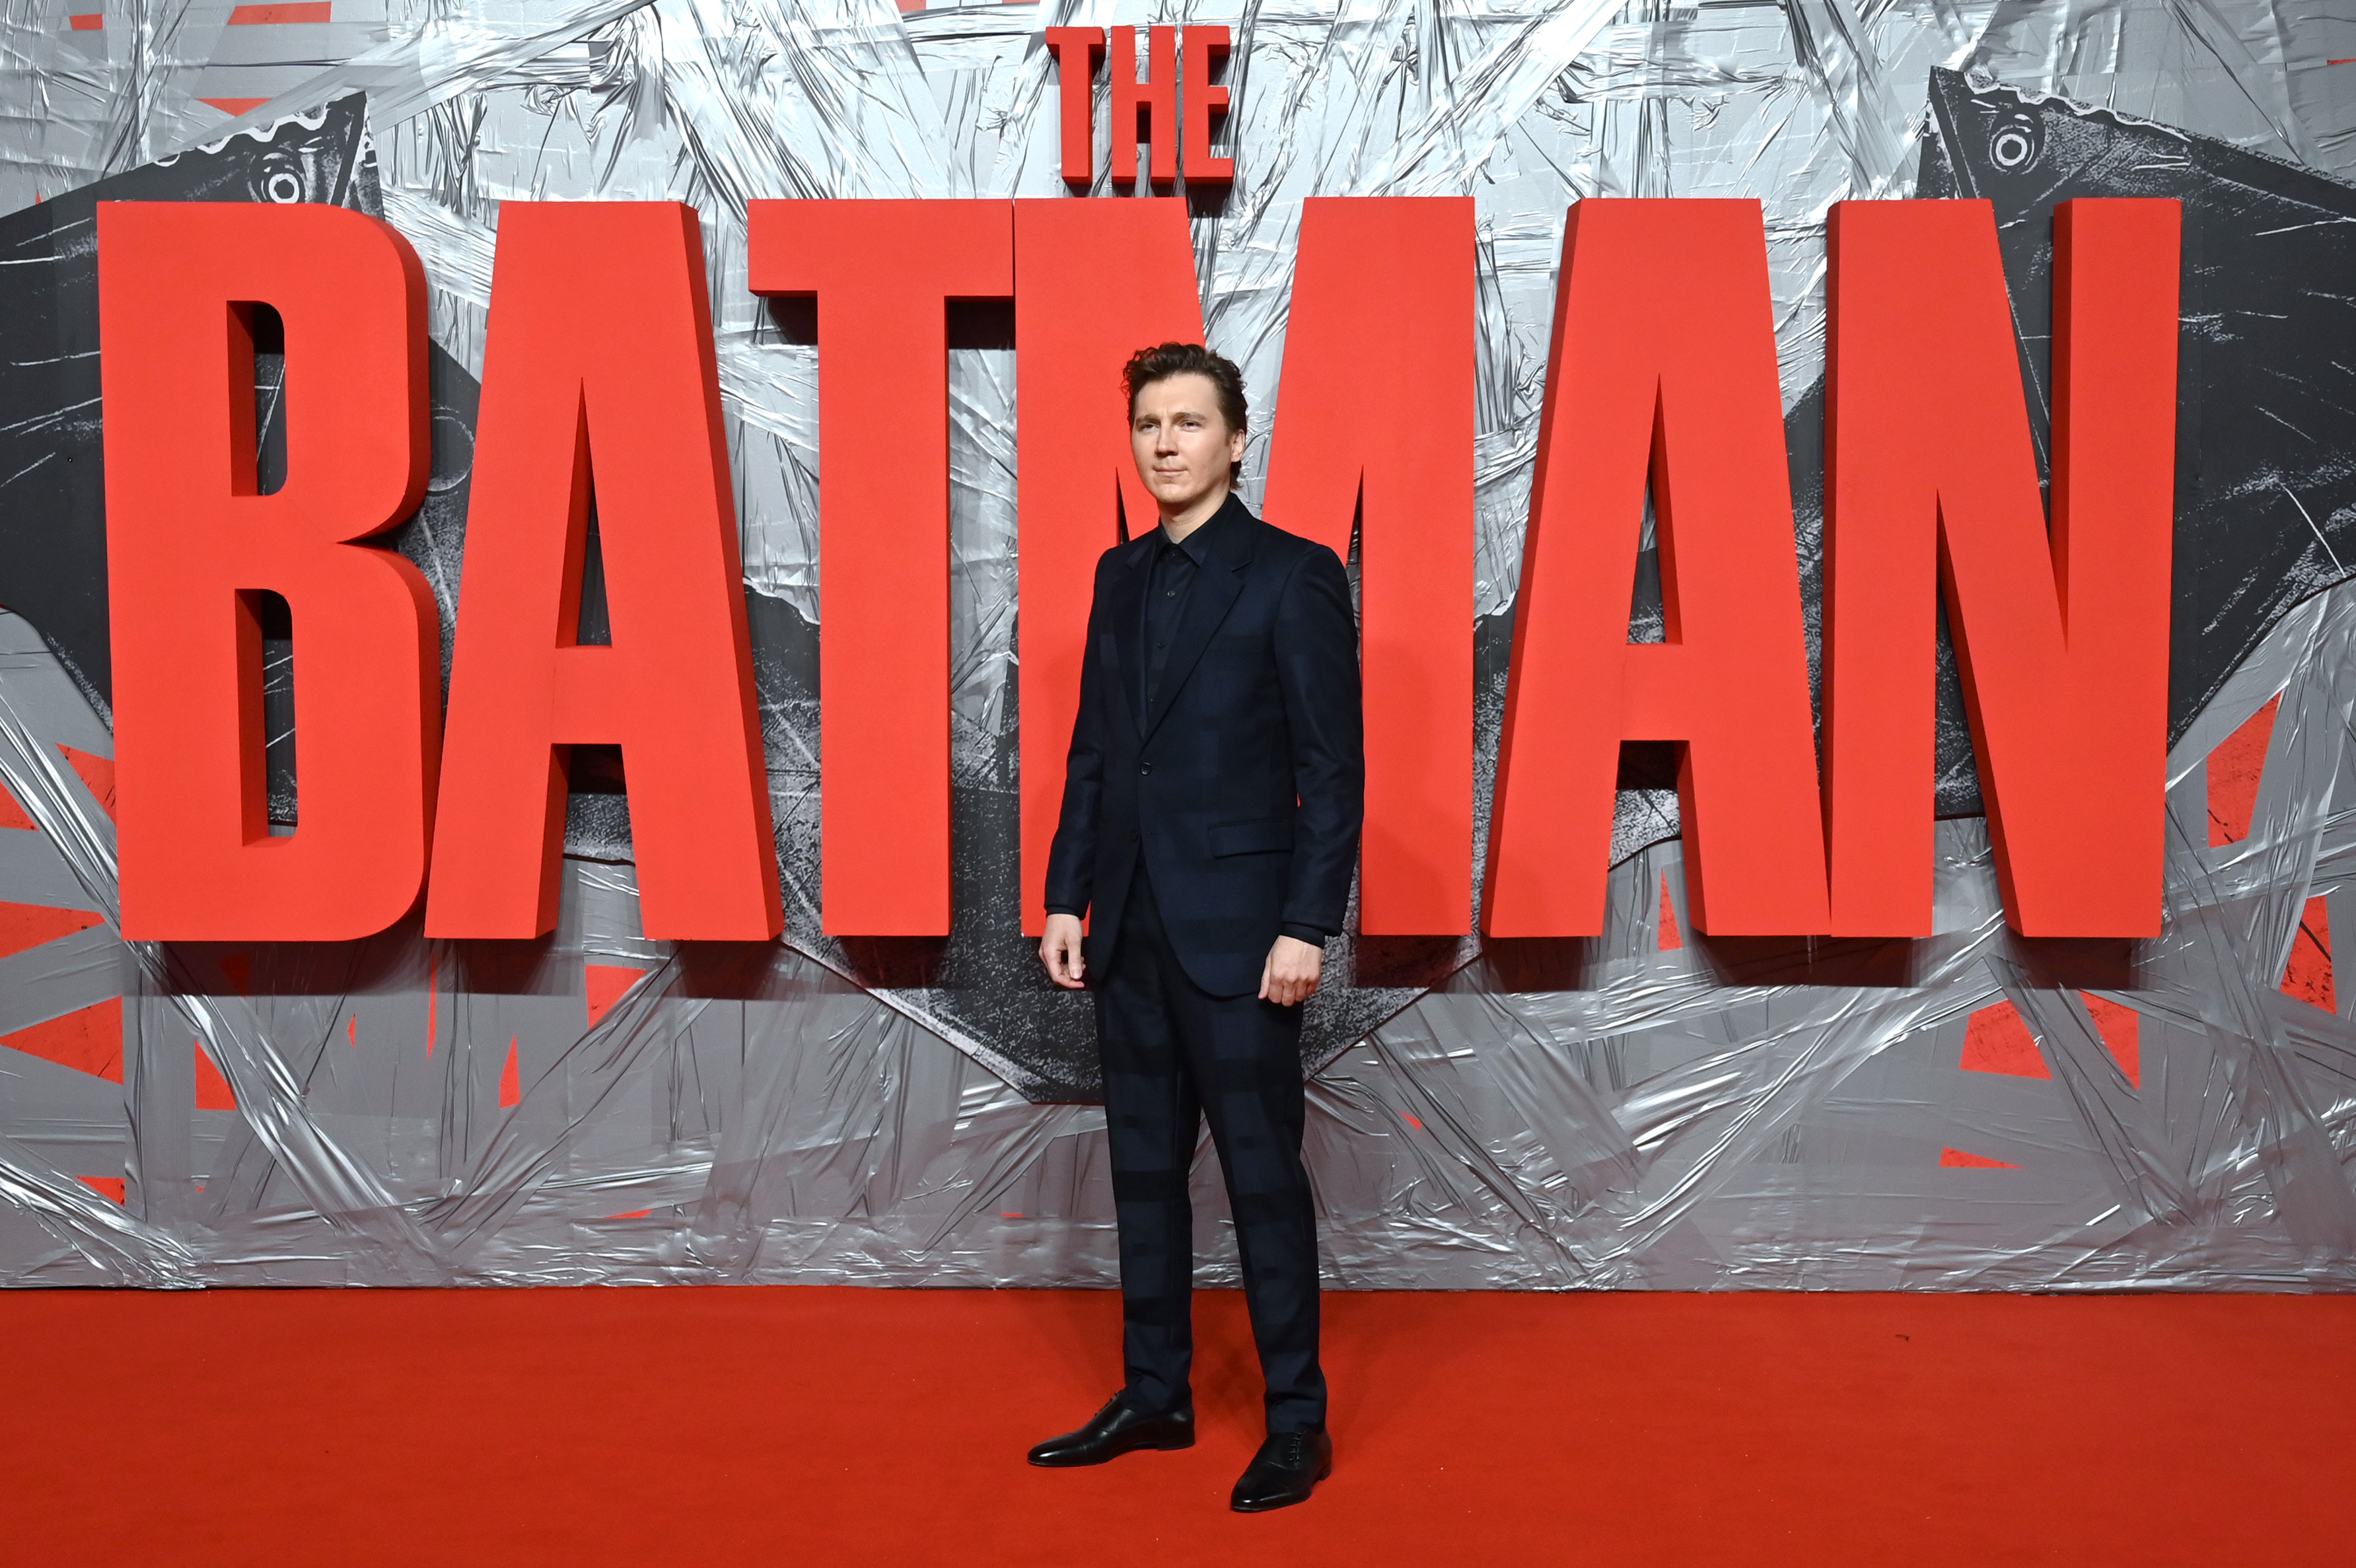 Paul Dano, who plays the Riddler in 'The Batman,' wears a black suit while standing in front of a sign for 'The Batman.'